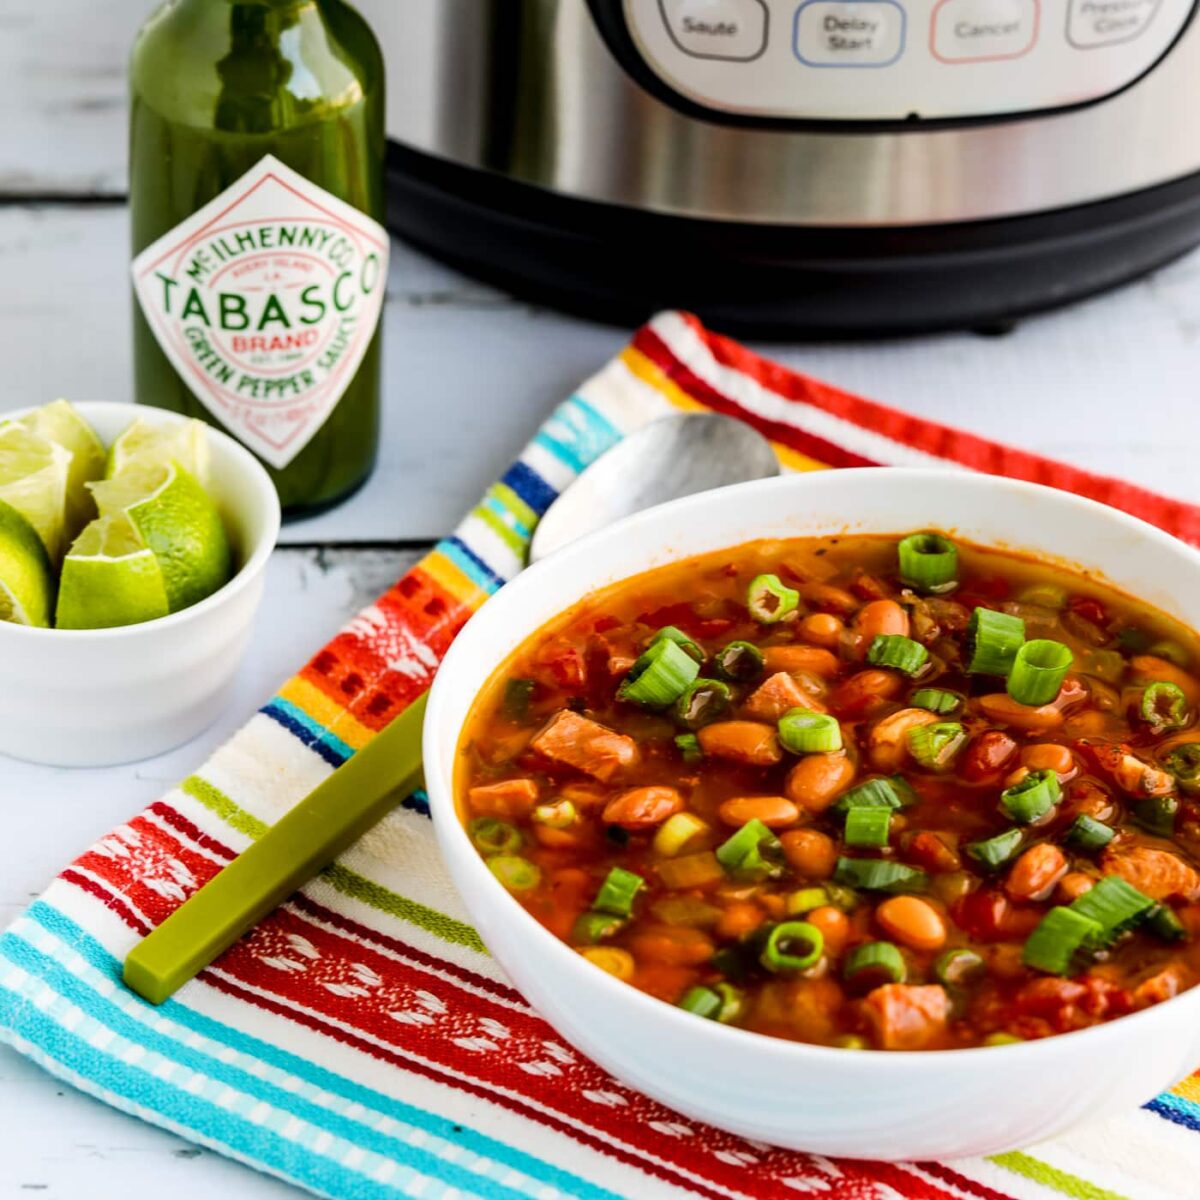 Square image for Instant Pot Ham and Bean Soup showing soup in serving bowl with limes on the side and Instant Pot in back.